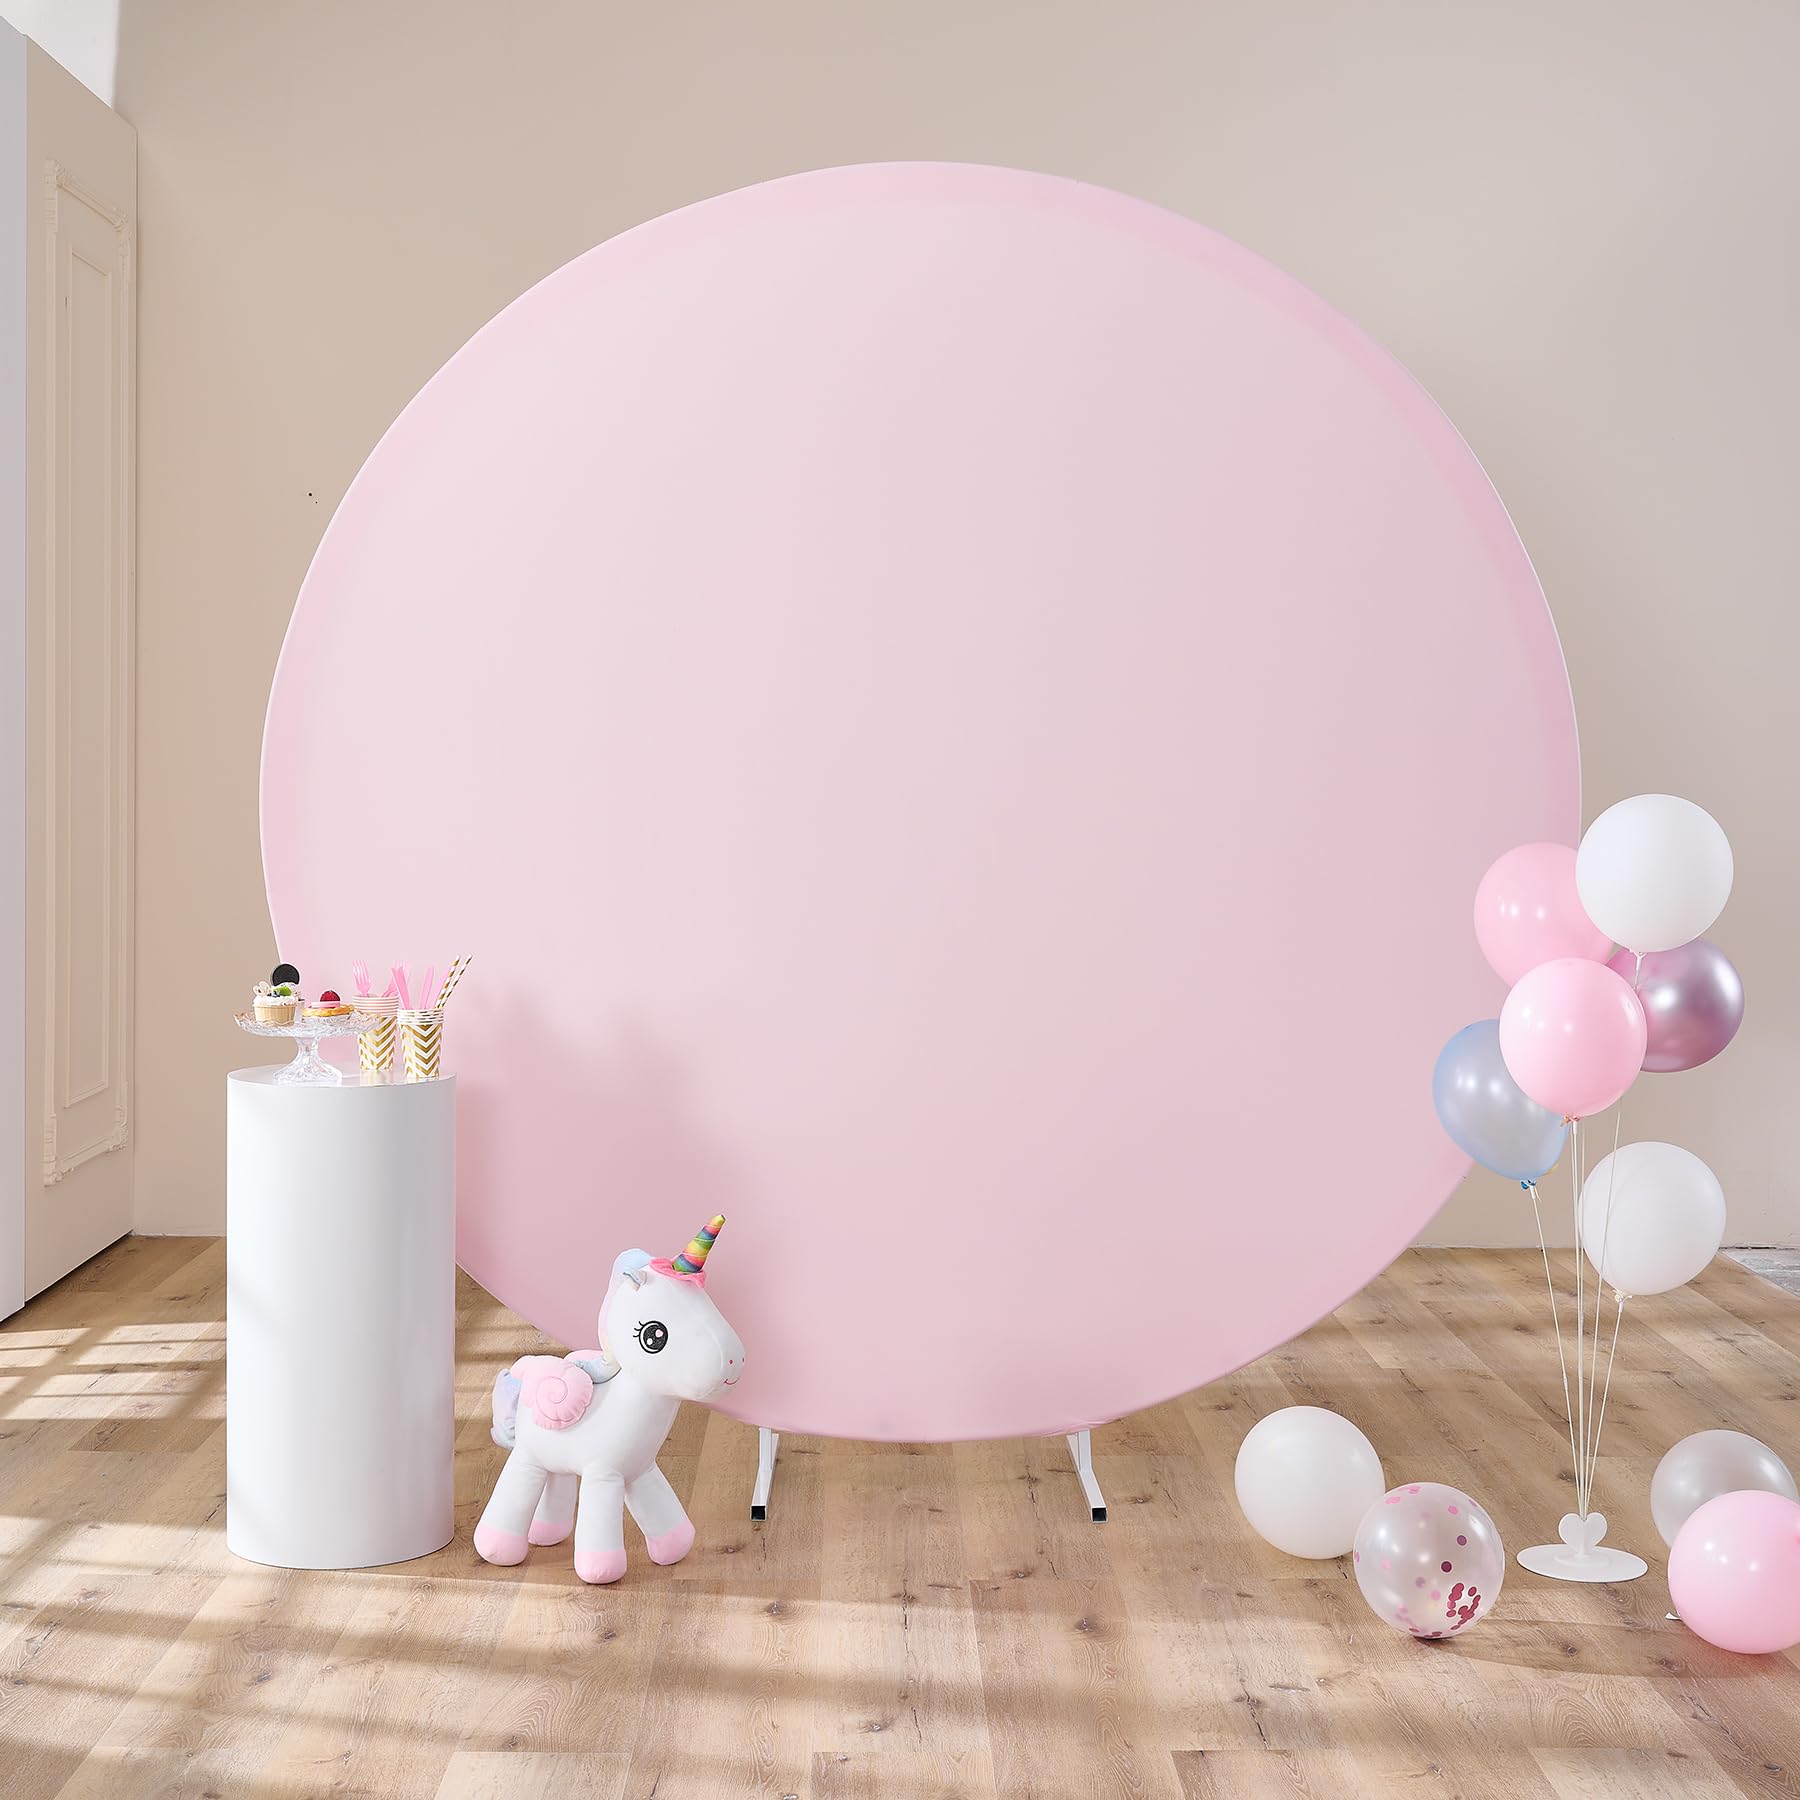 6.5FT Baby Pink Round Backdrop Covers Arch Circle Background Covers for Birthday Party Baby Shower Wedding Background, Suitable for 6ft/6.5ft Circle Stand